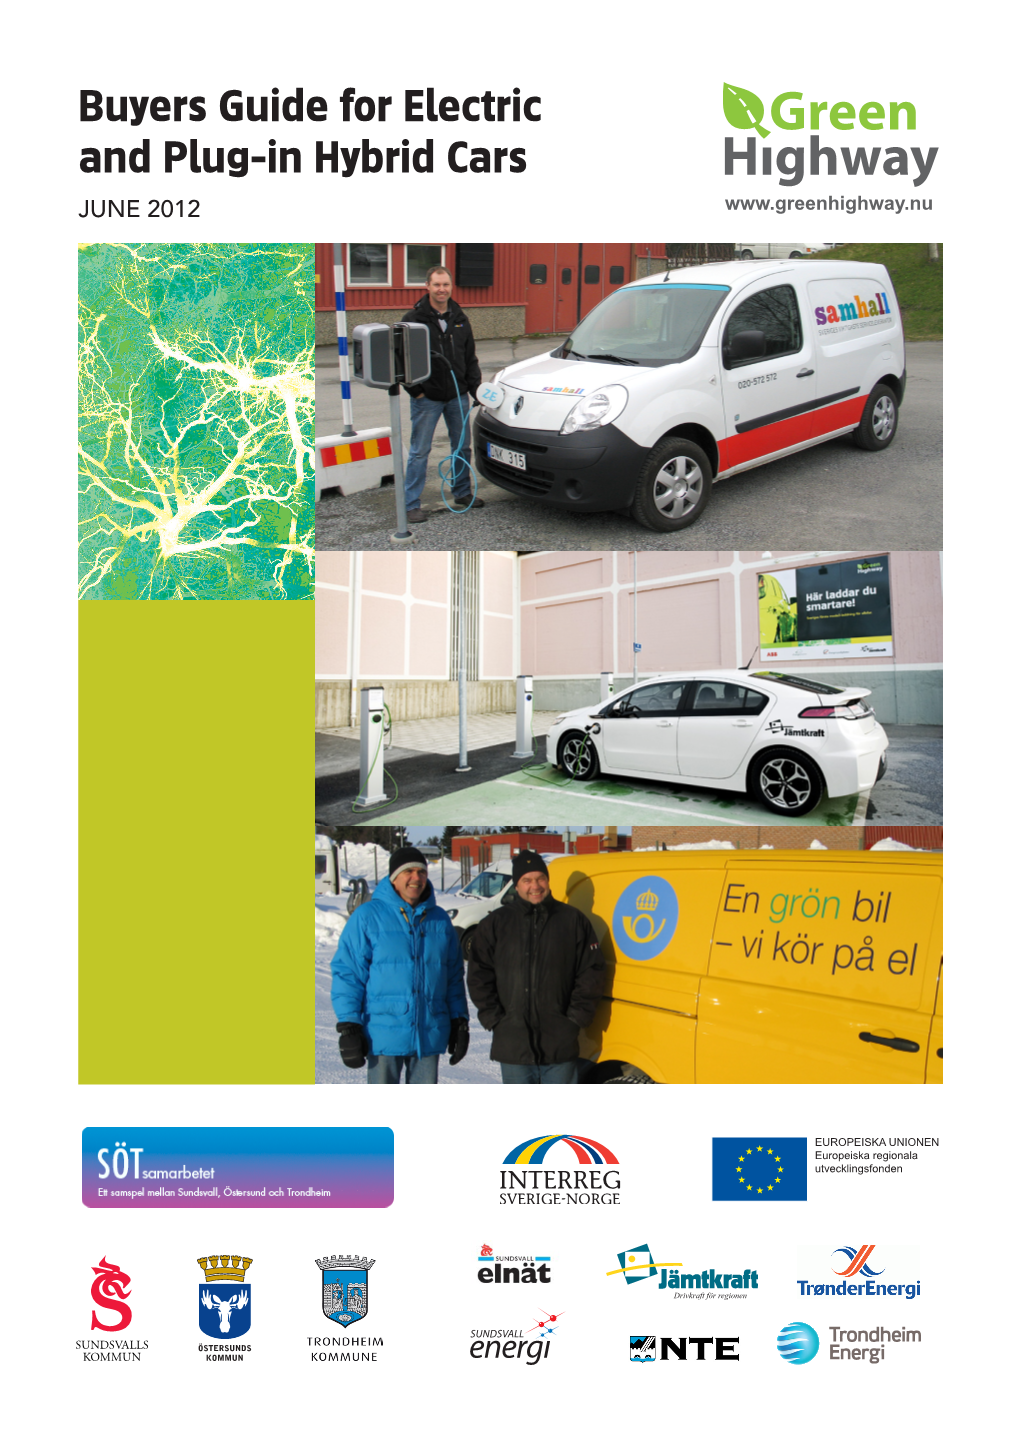 Buyers Guide for Electric and Plug-In Hybrid Cars JUNE 2012